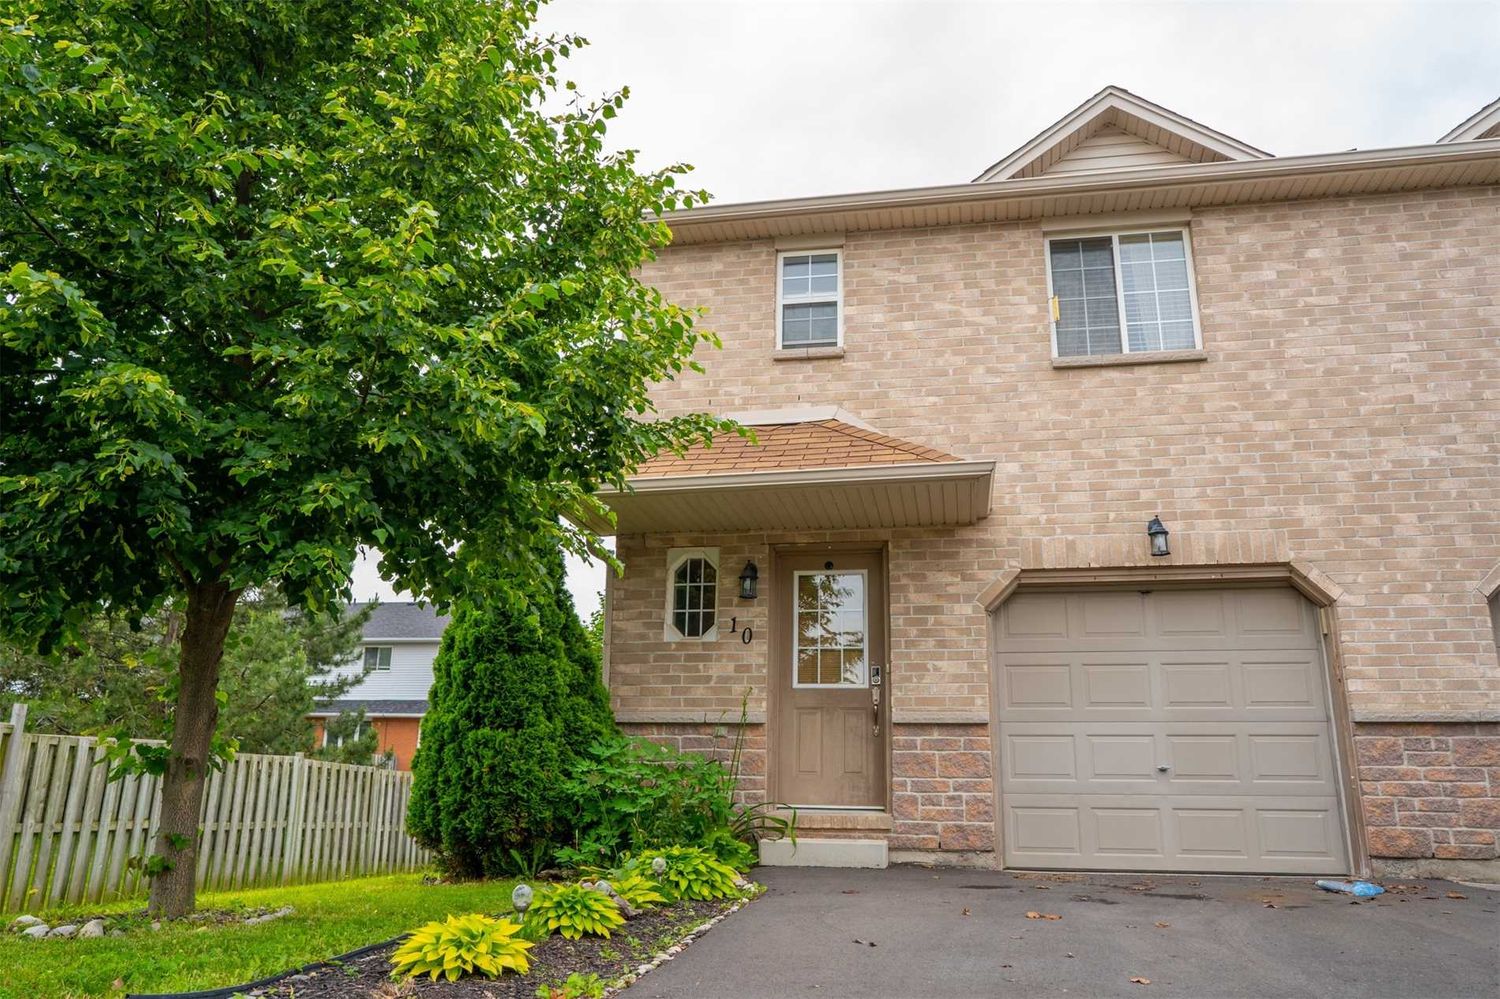 39 Pinewoods Drive. Highland Park Estates Townhomes is located in  Hamilton, Toronto